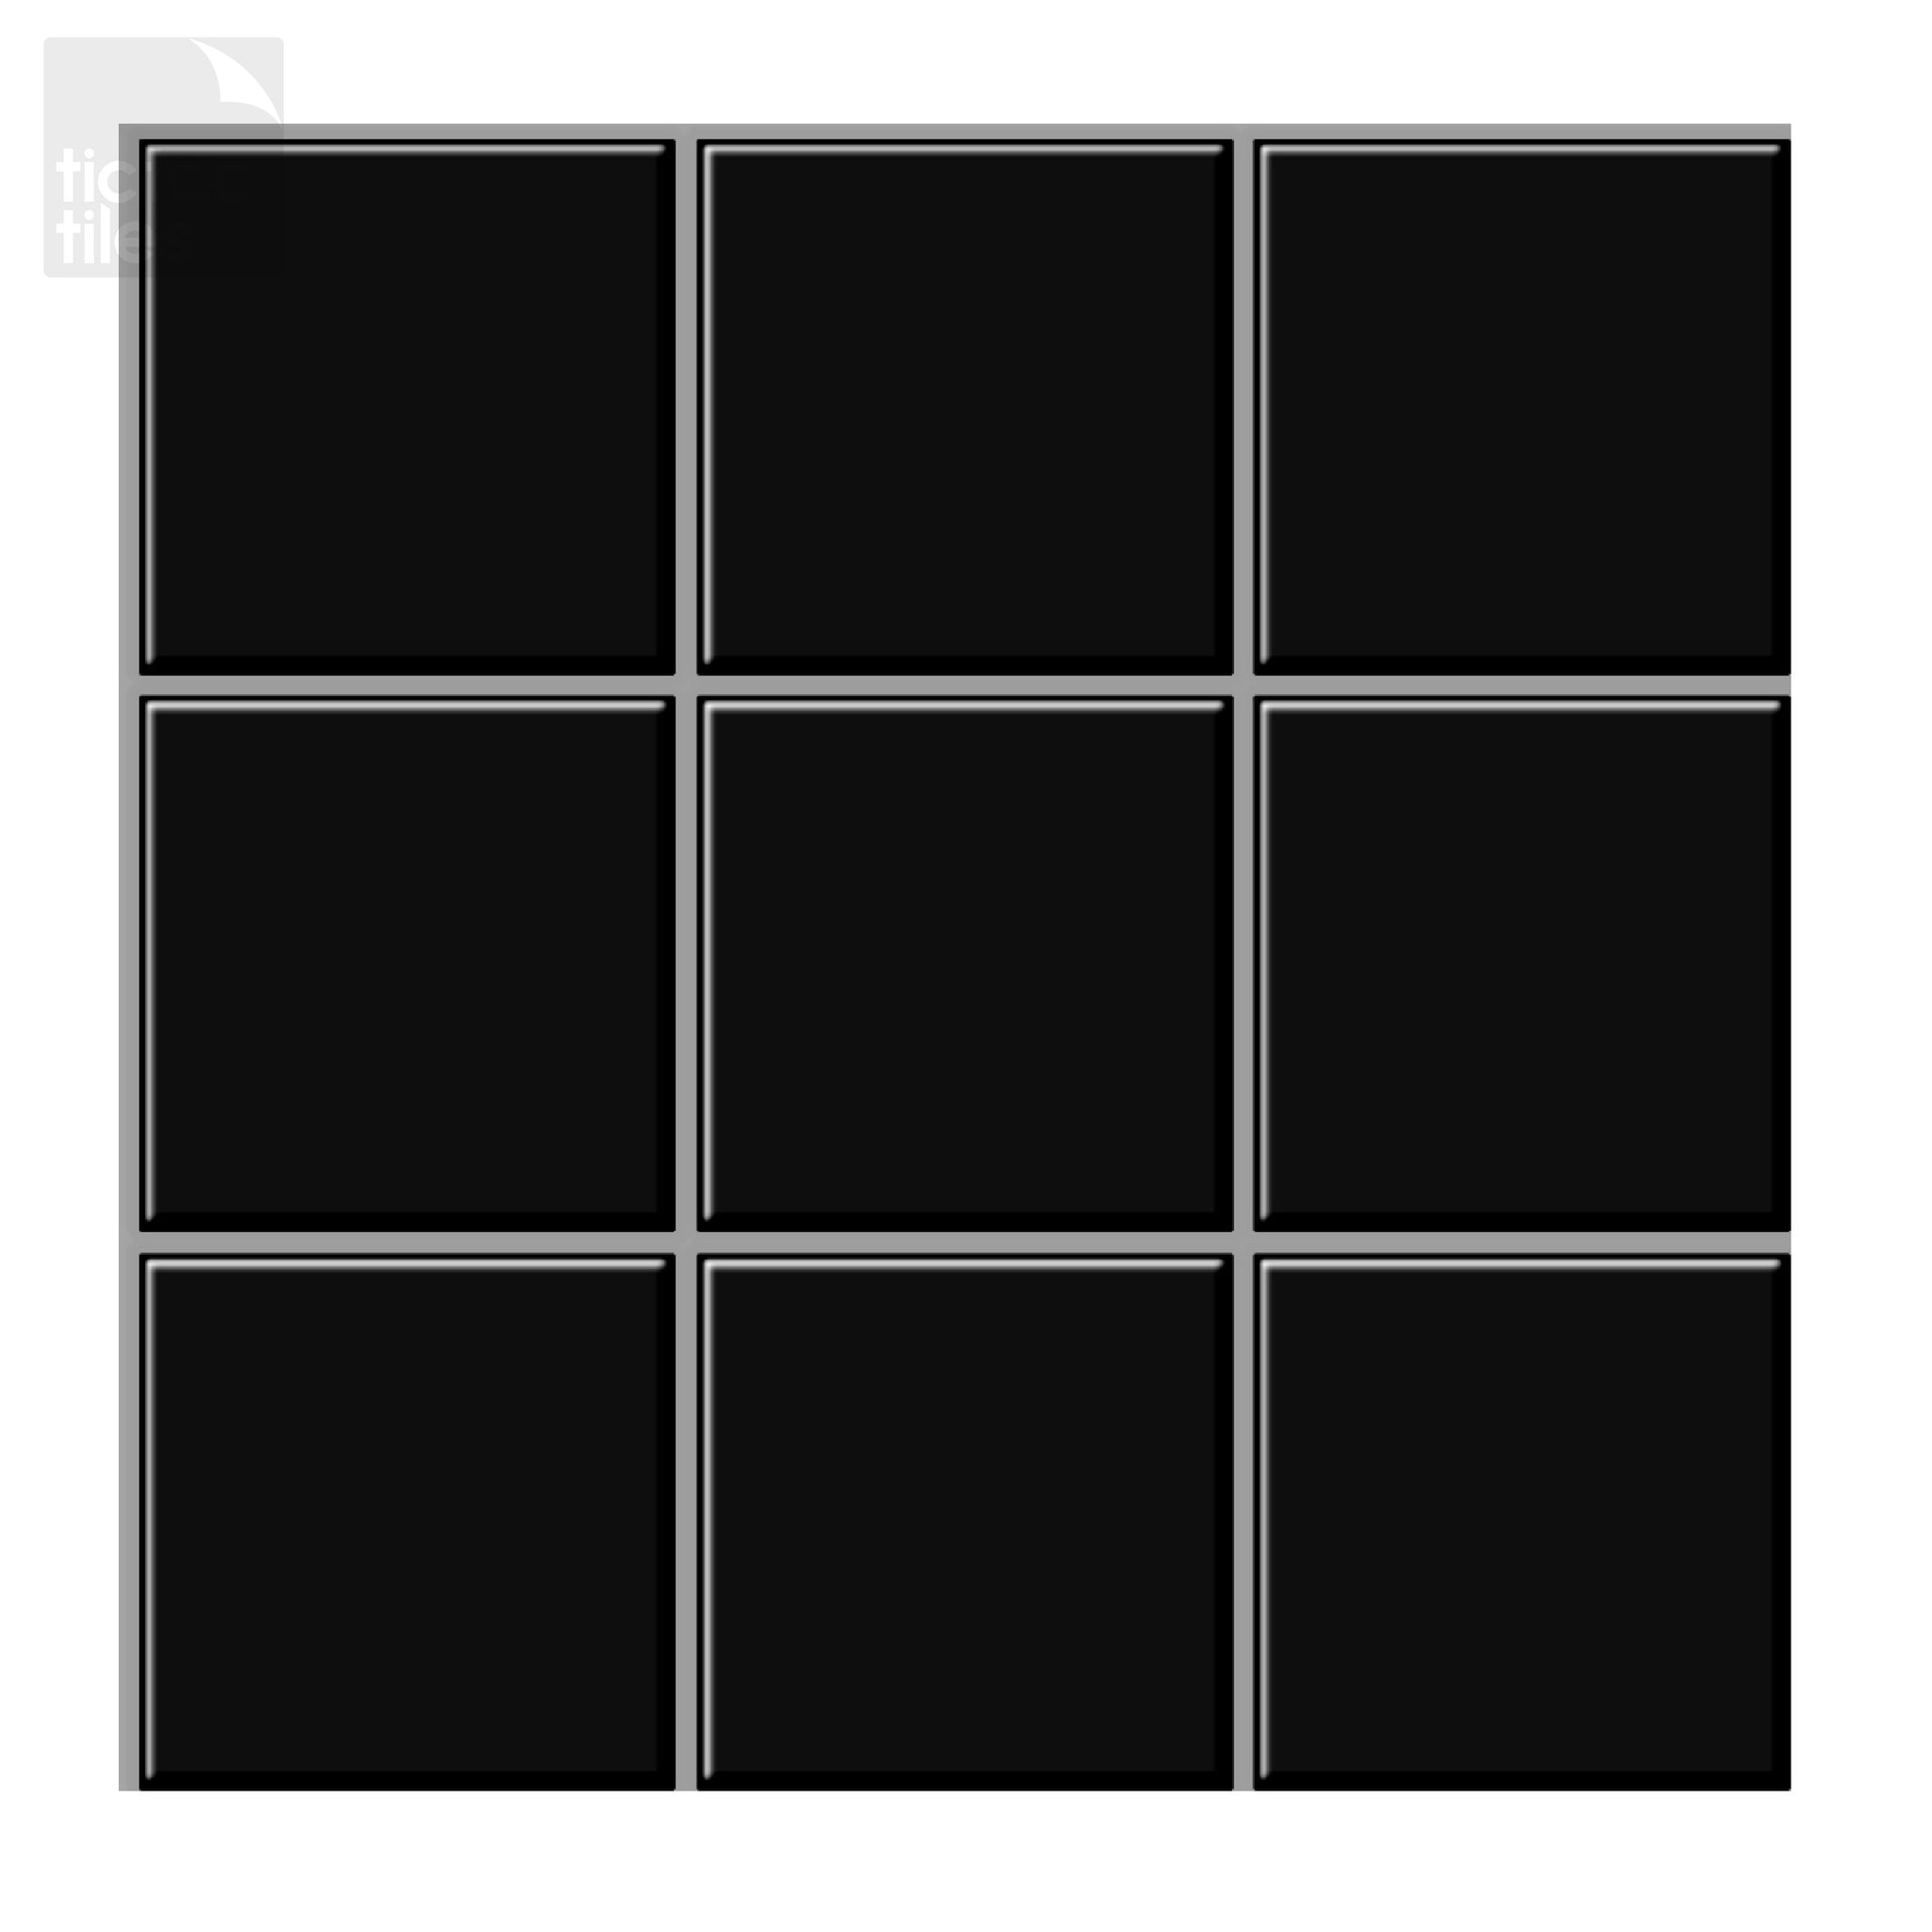 ✨NEW✨ Thicker Marmo Black Tile